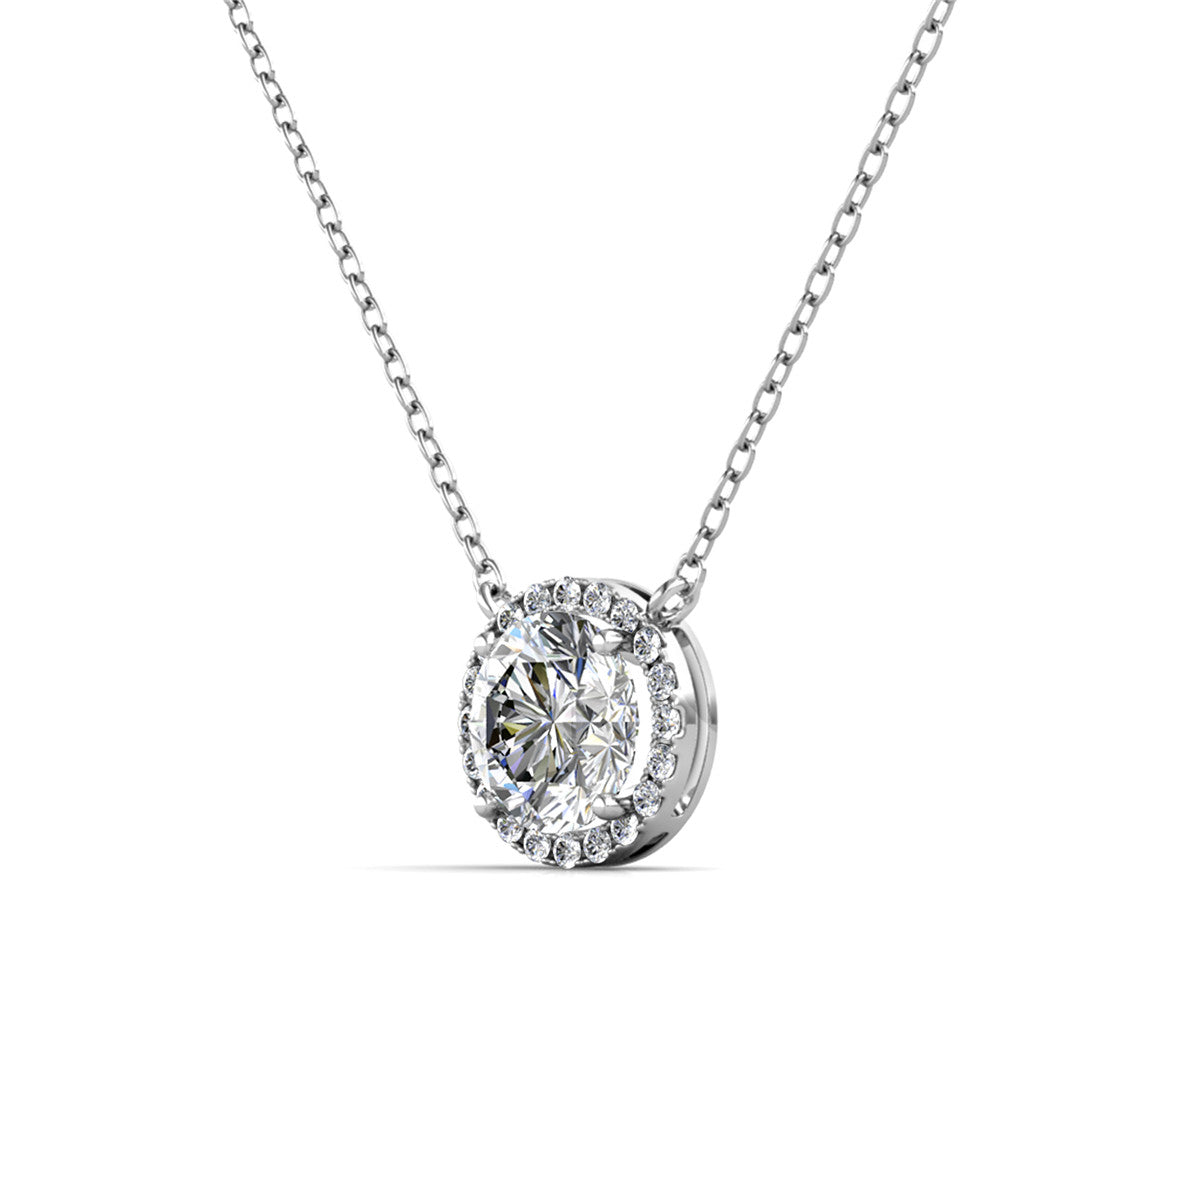 Moissanite by Cate & Chloe Sutton Sterling Silver Necklace with Moissanite Crystals